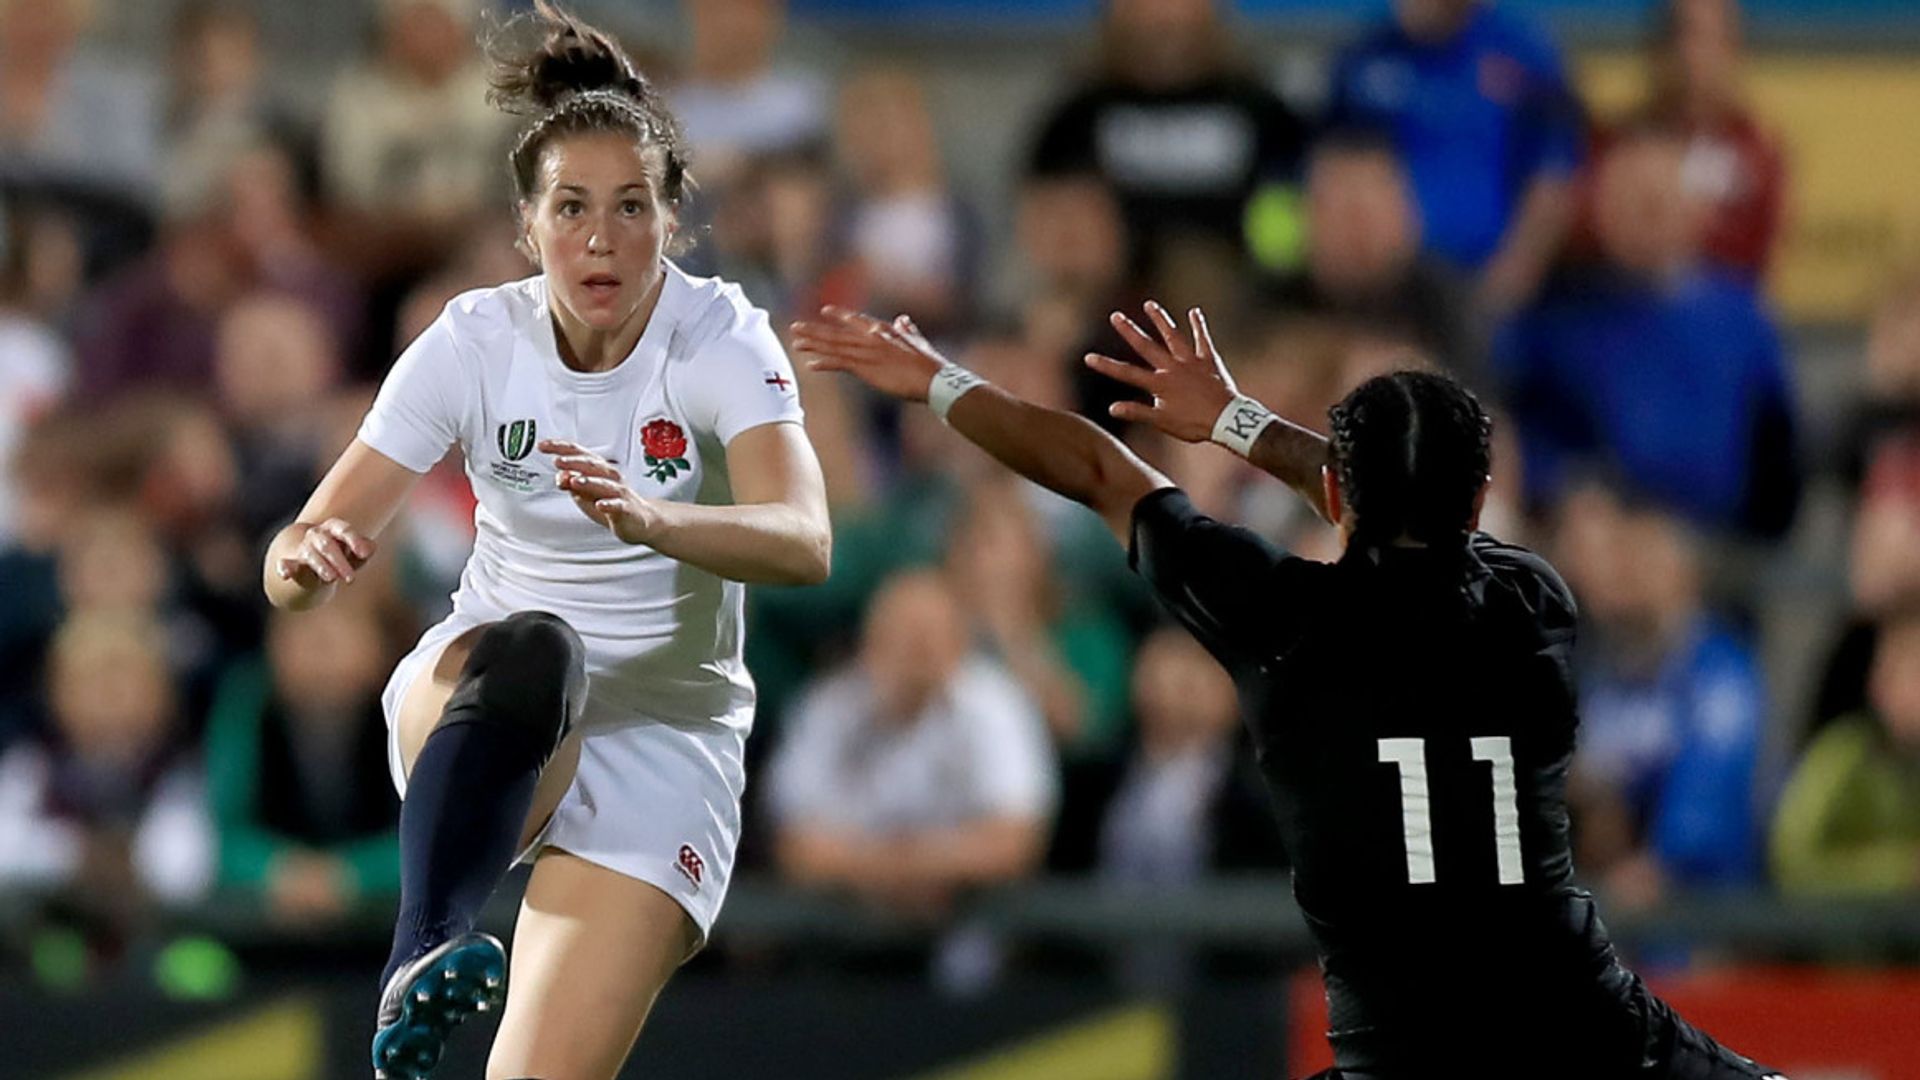 Govt to fund bids for Women's Rugby World Cup & TdF